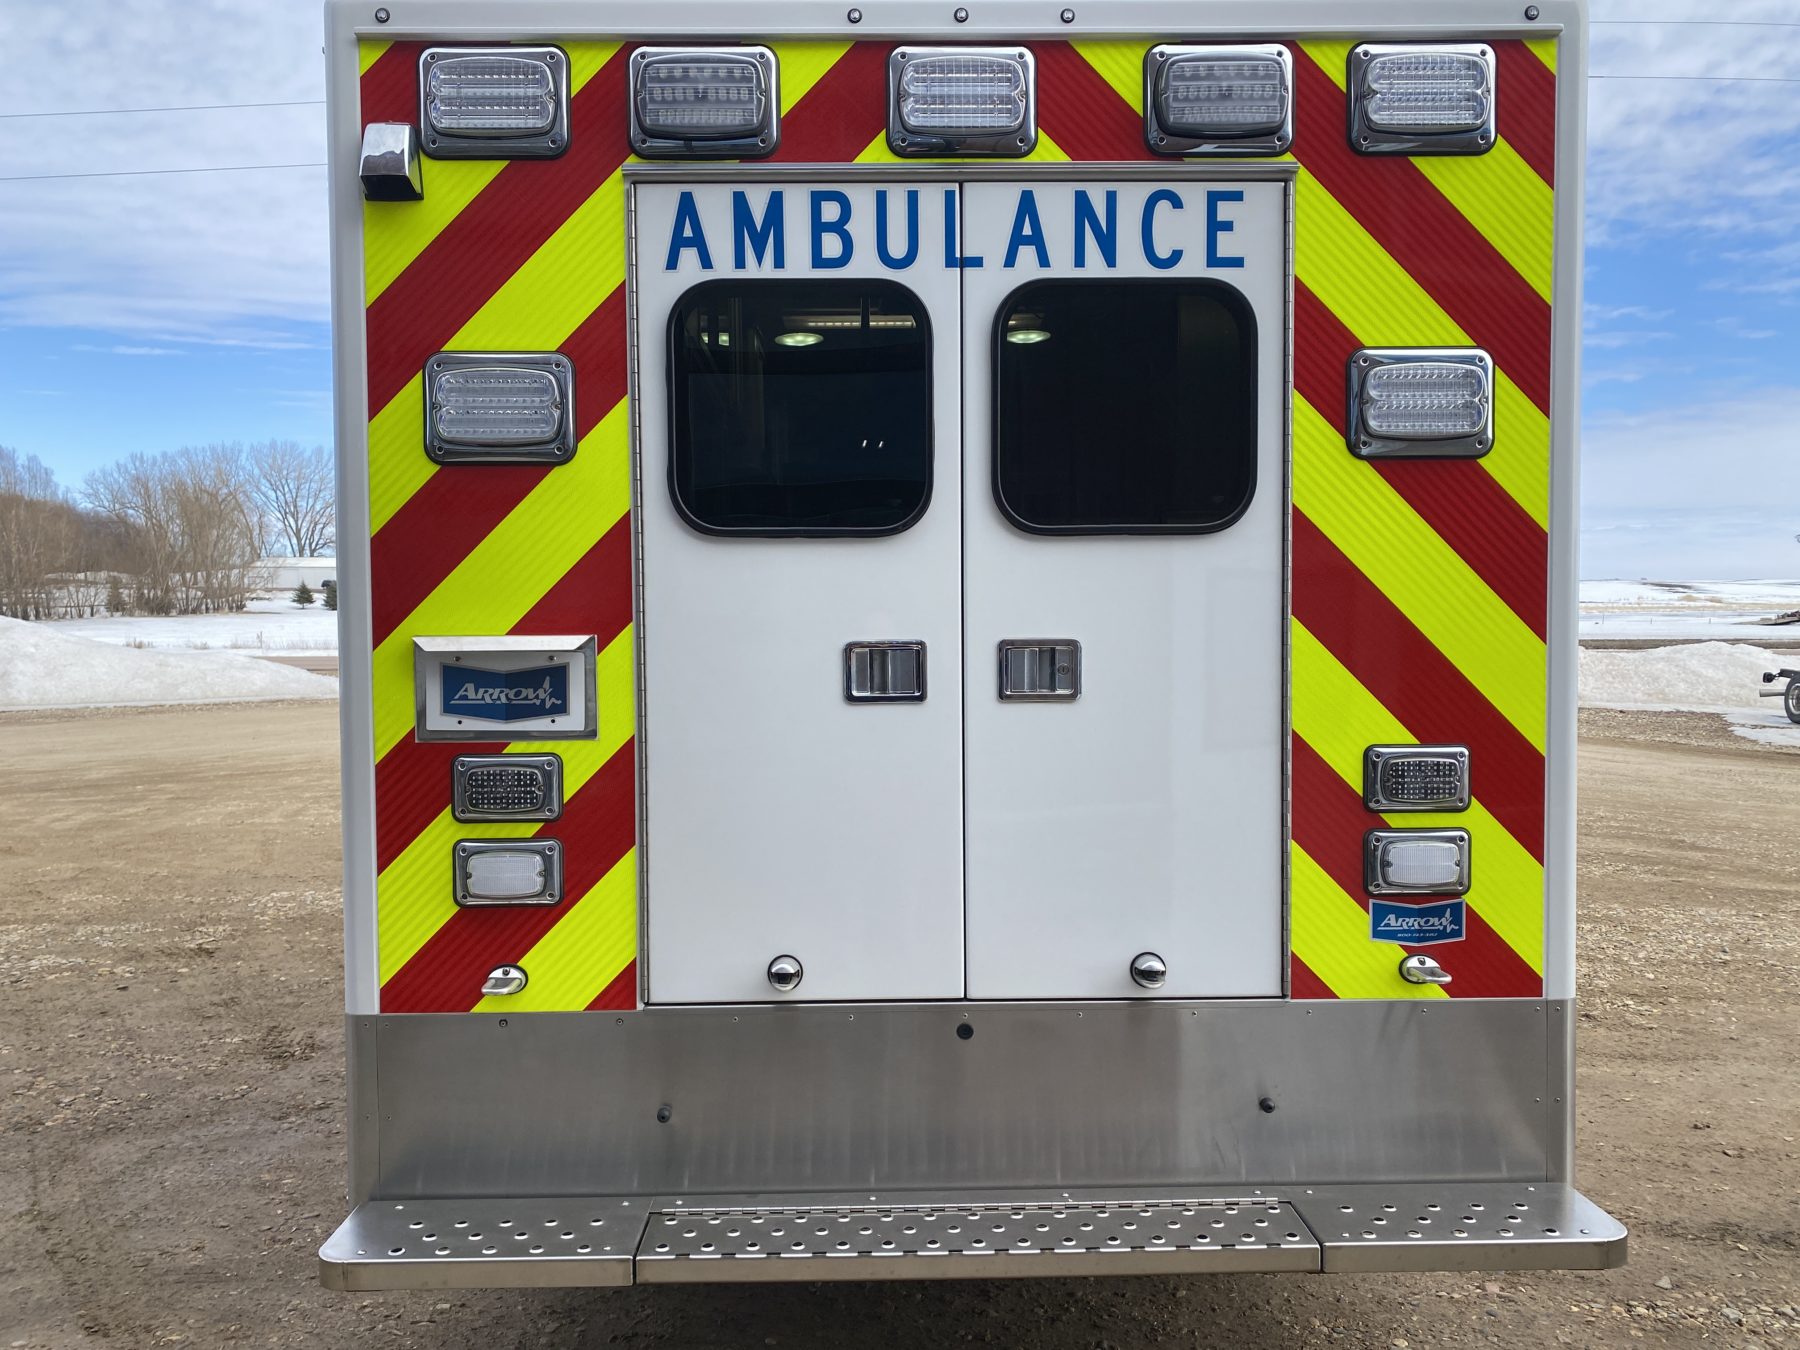 2020 Ram 4500 4x4 Heavy Duty Ambulance For Sale – Picture 8